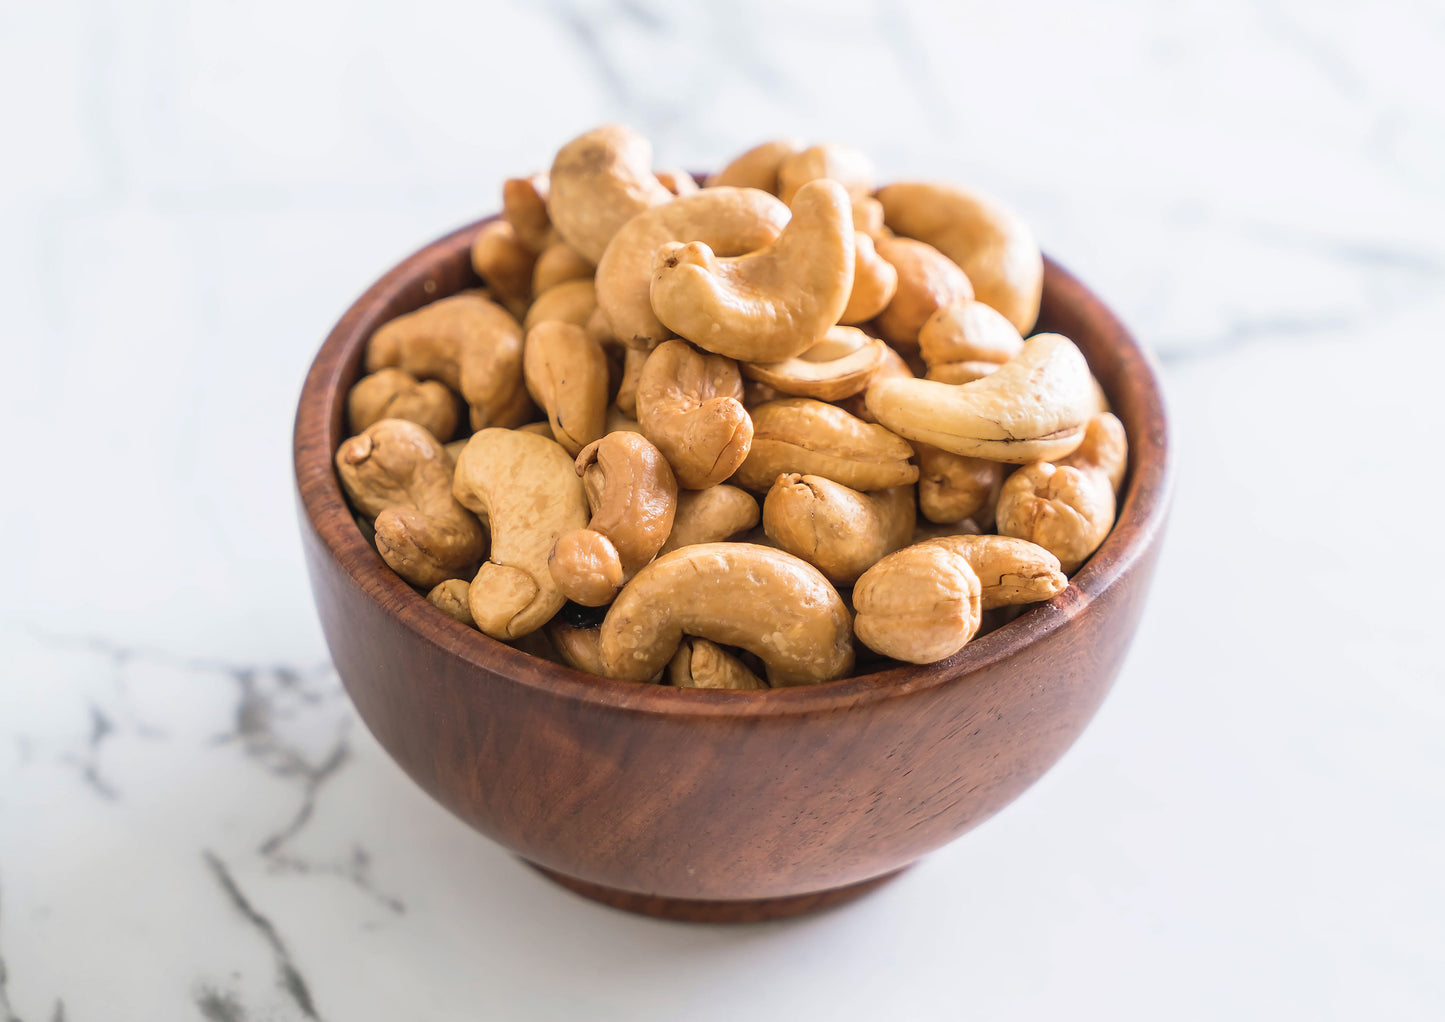 Dry Roasted Whole Cashews – Unsalted, Oven Roasted Cashew Nuts, No Oil Added, Kosher, Vegan, Bulk. Crunchy Texture. Good Source of Protein and Healthy Fats. Great Everyday Snack